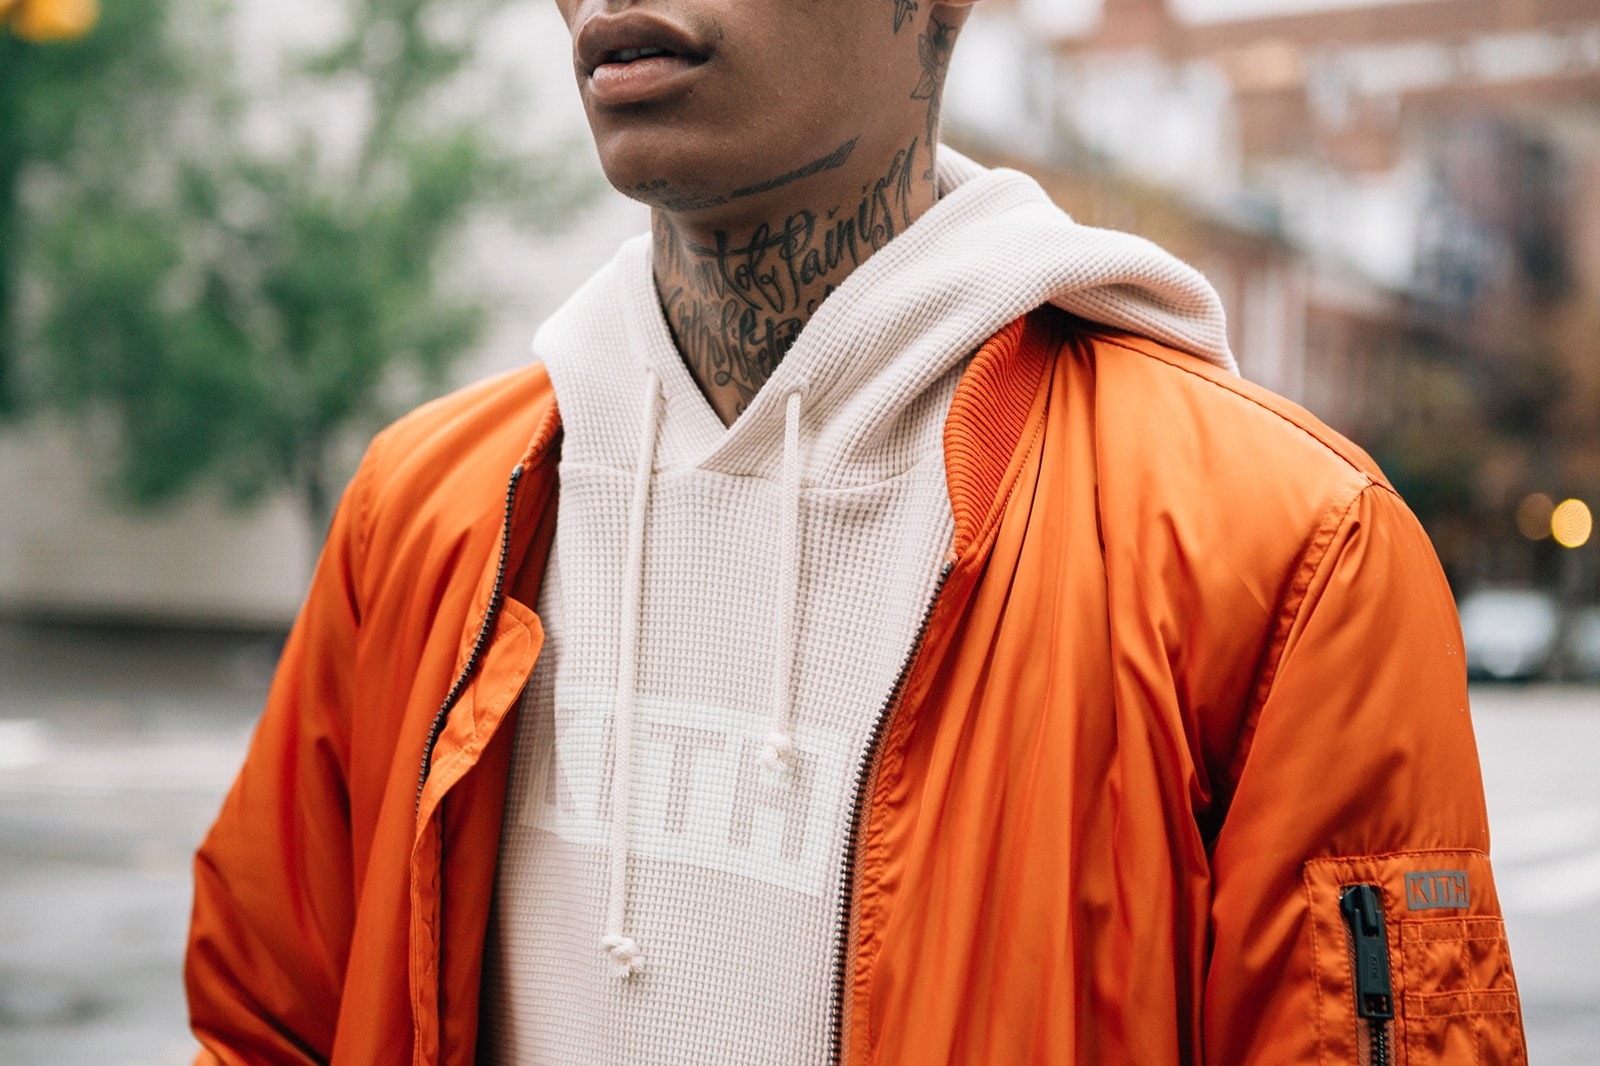 KITH 2016 Fall First Delivery